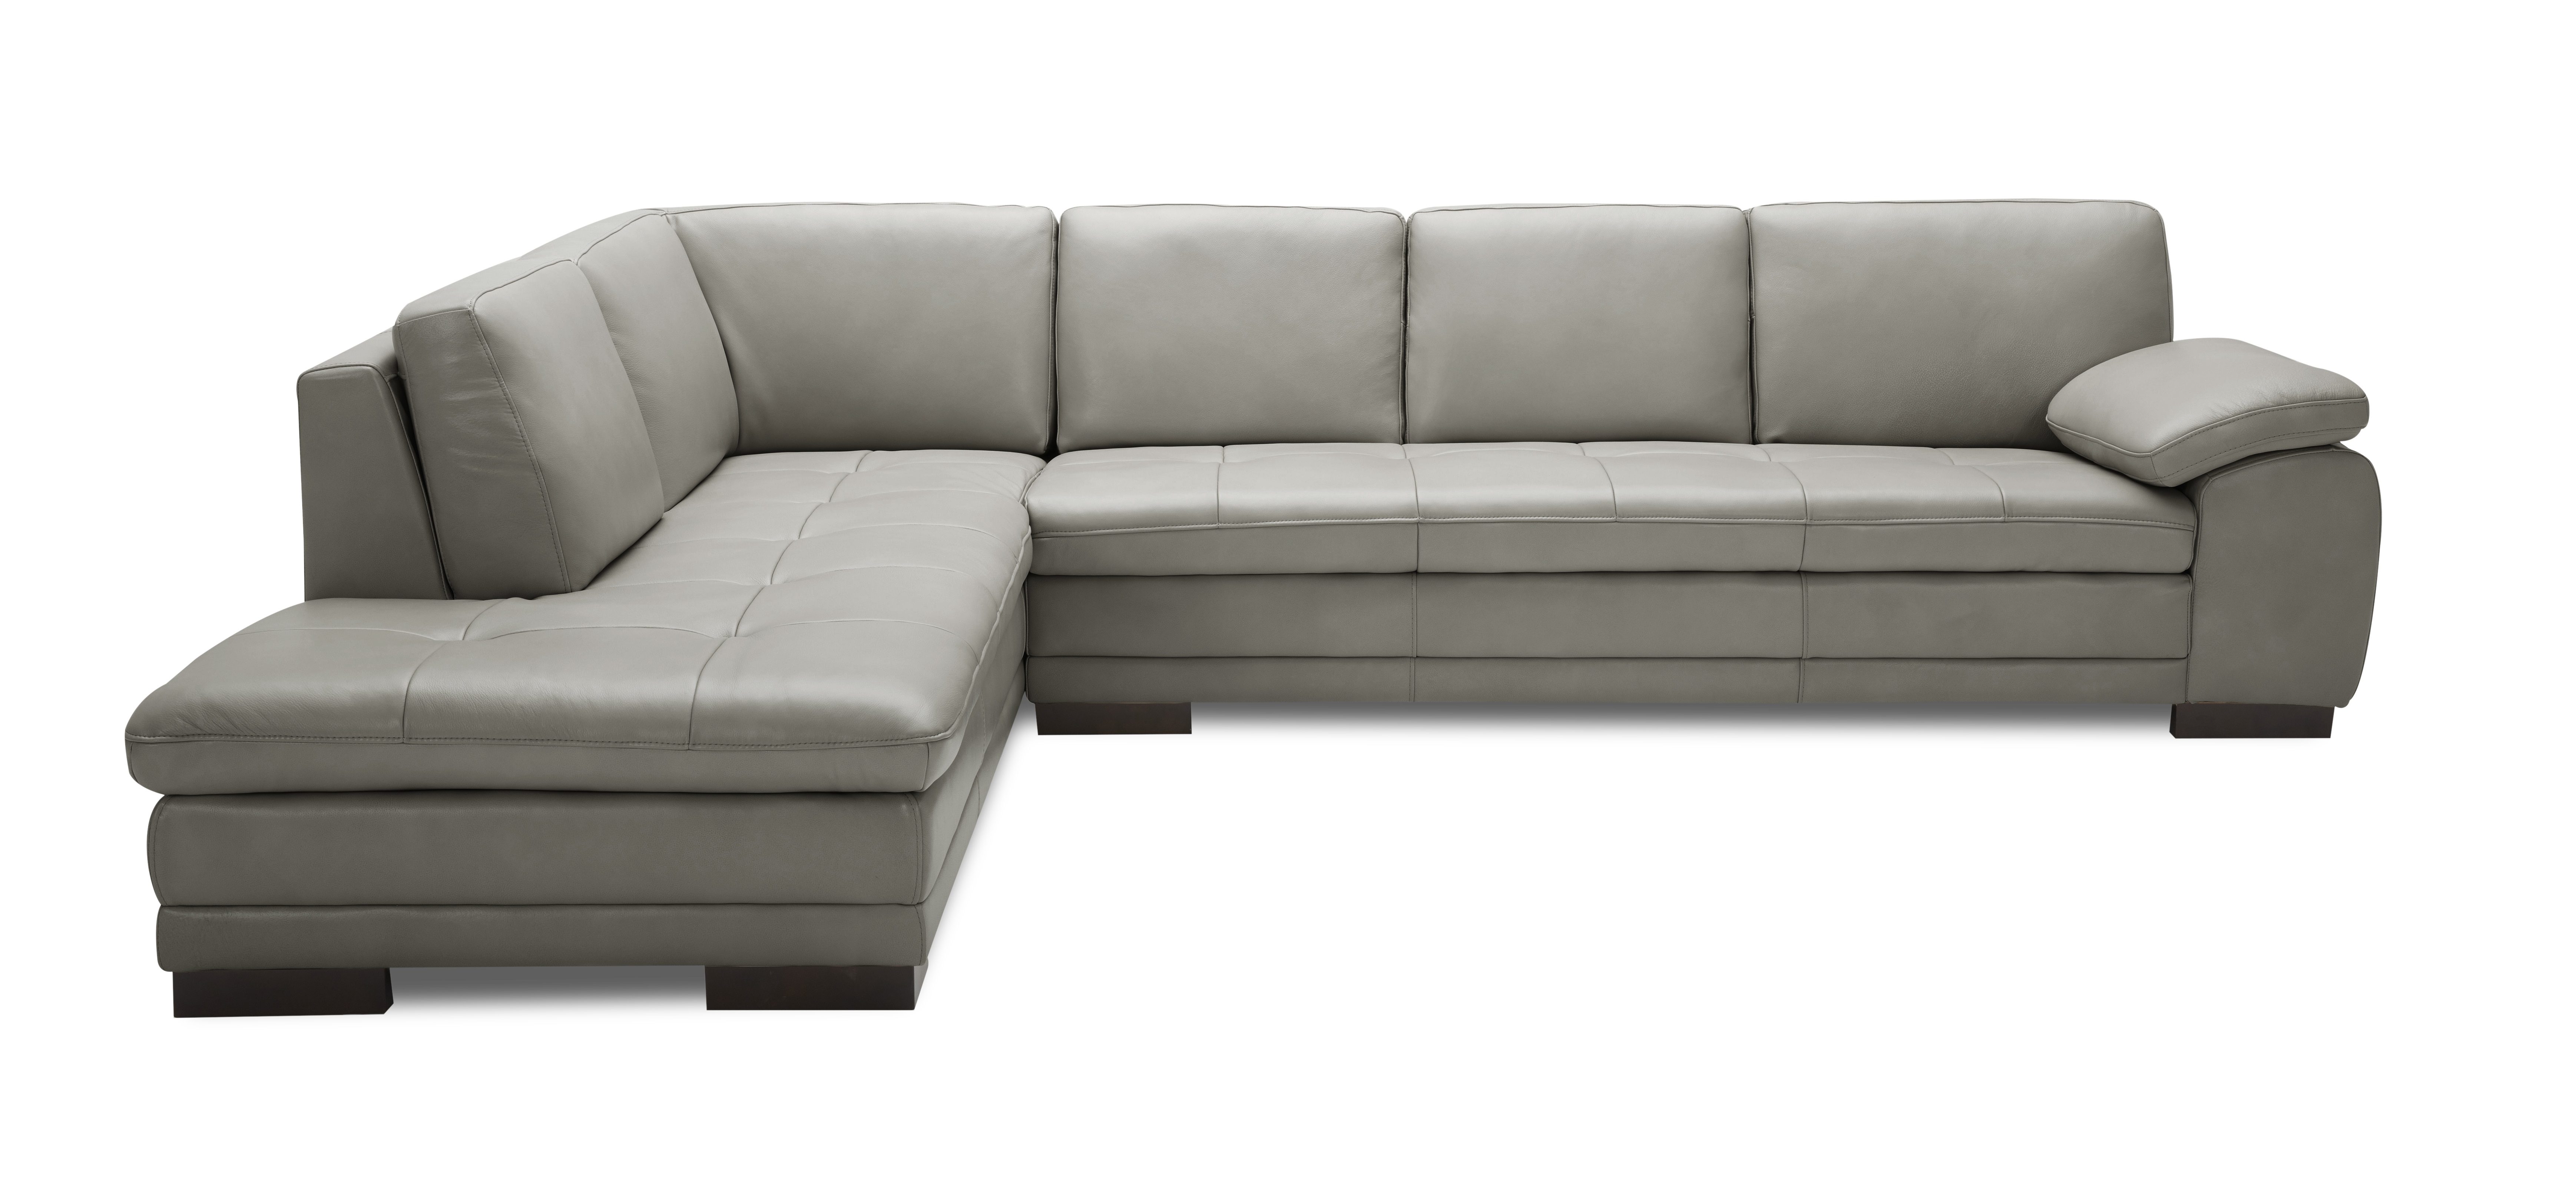 italian leather sectional sofa complete living room set